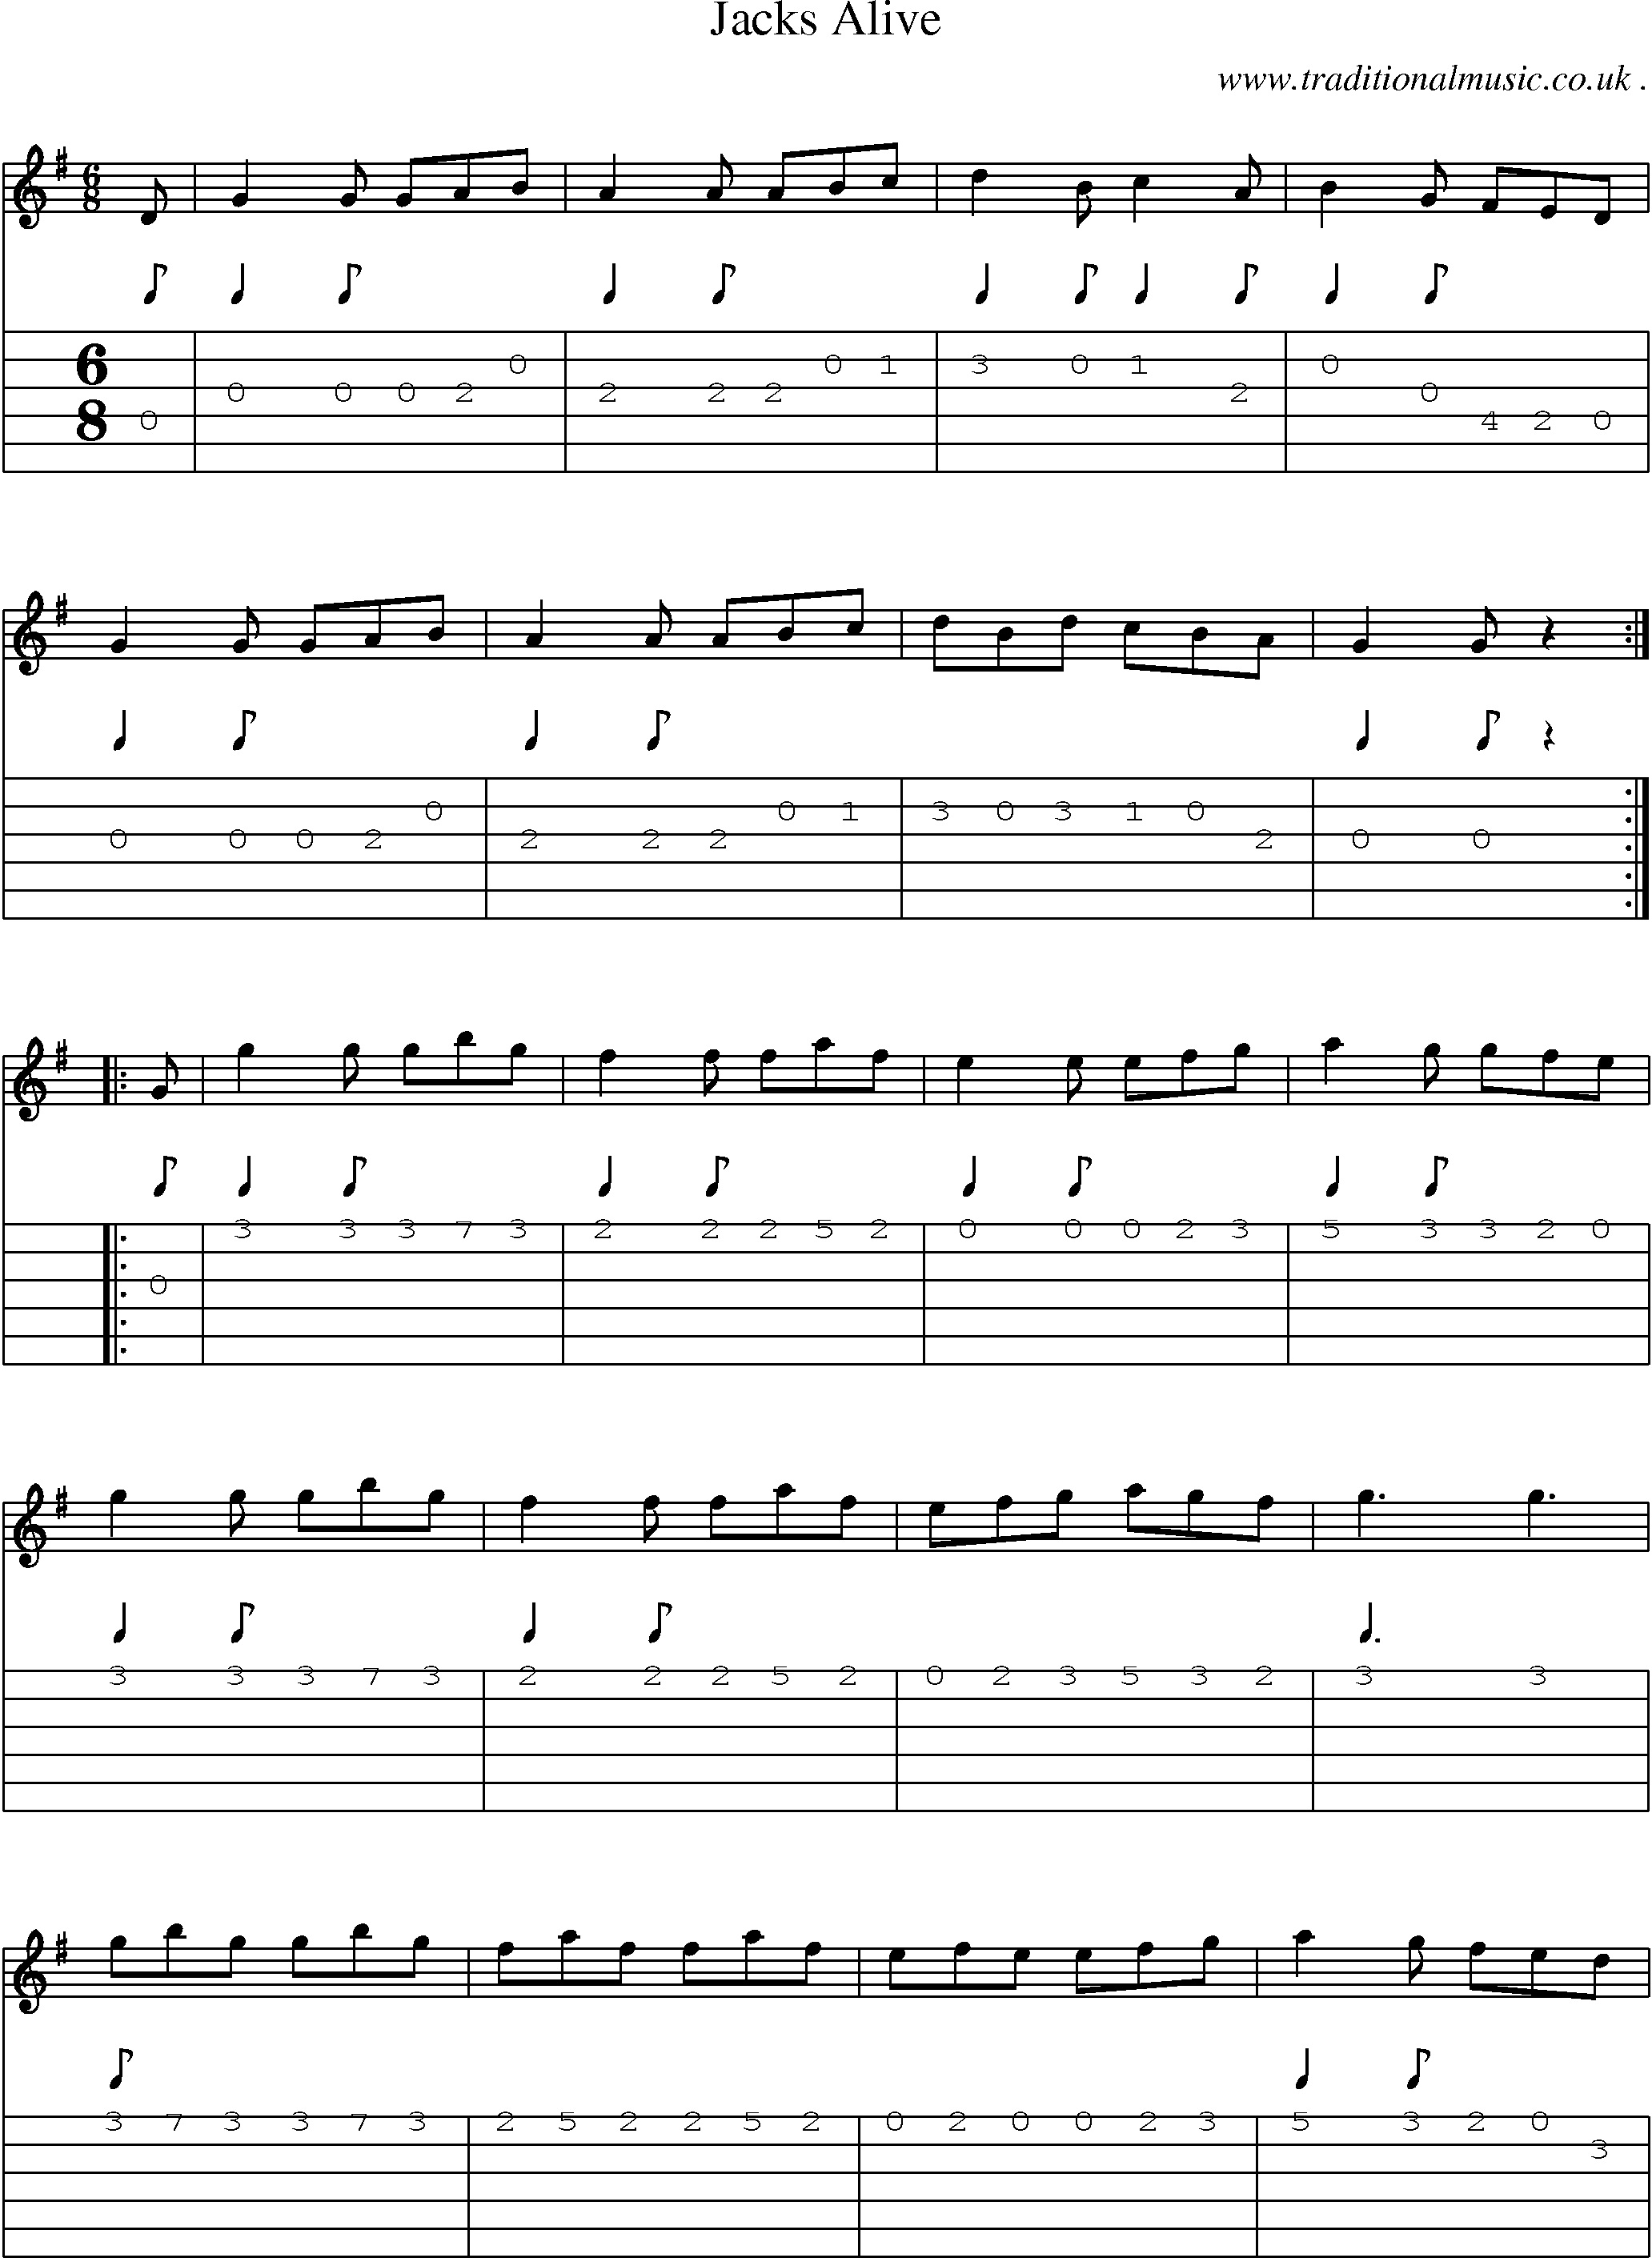 Sheet-Music and Guitar Tabs for Jacks Alive